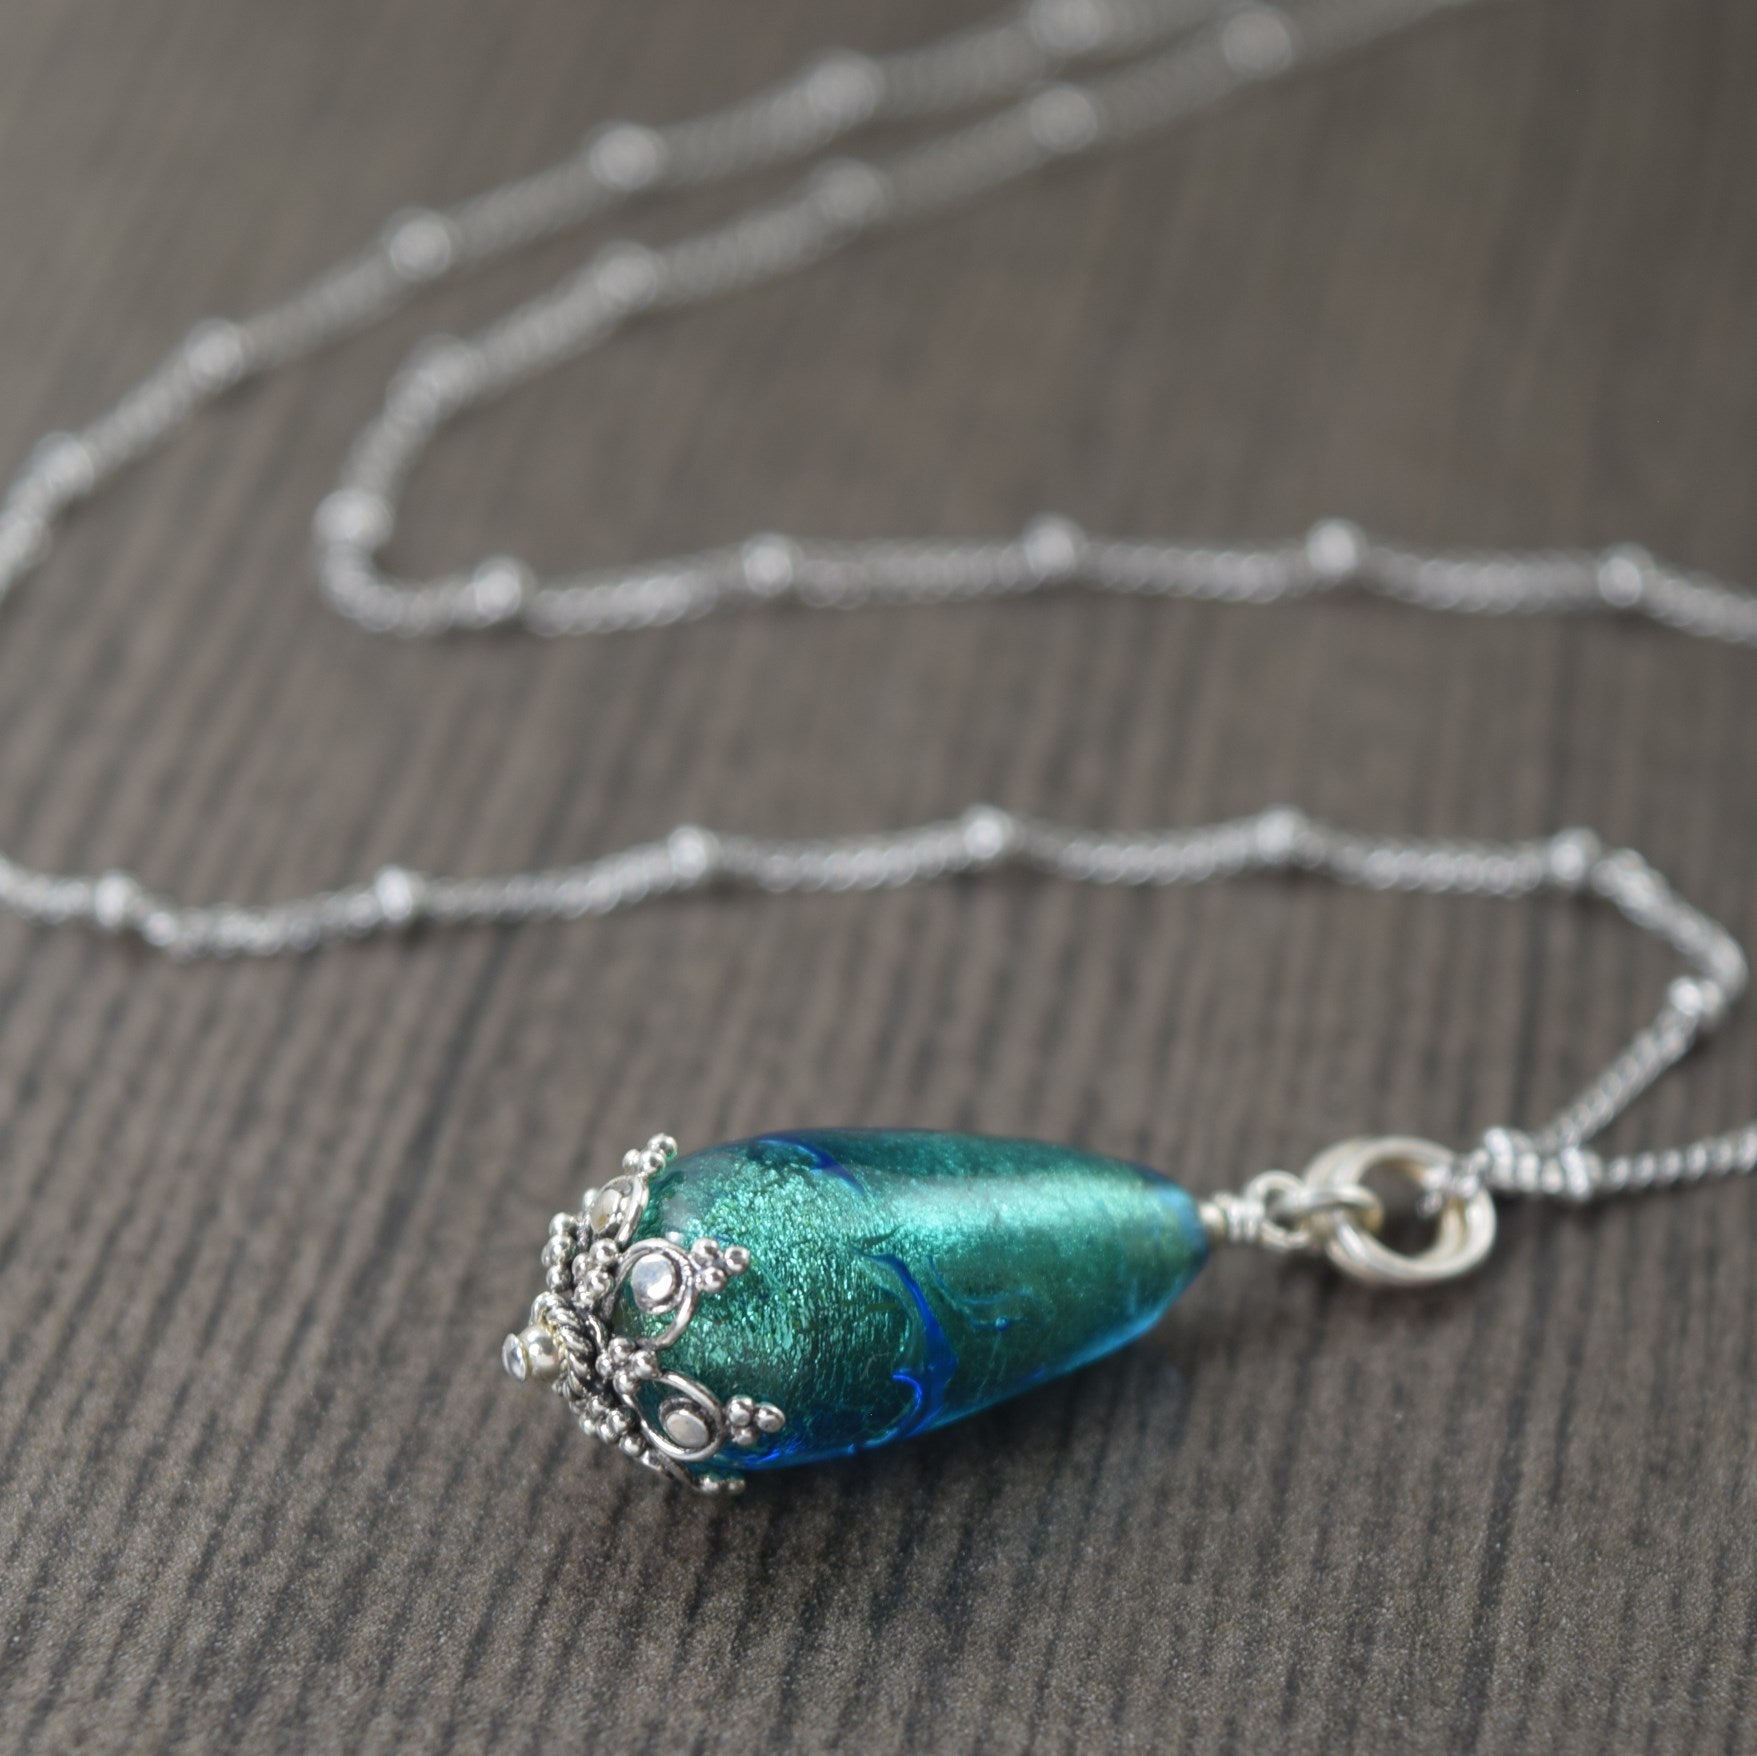 Teal Blue Murano glass necklace on sterling silver chain